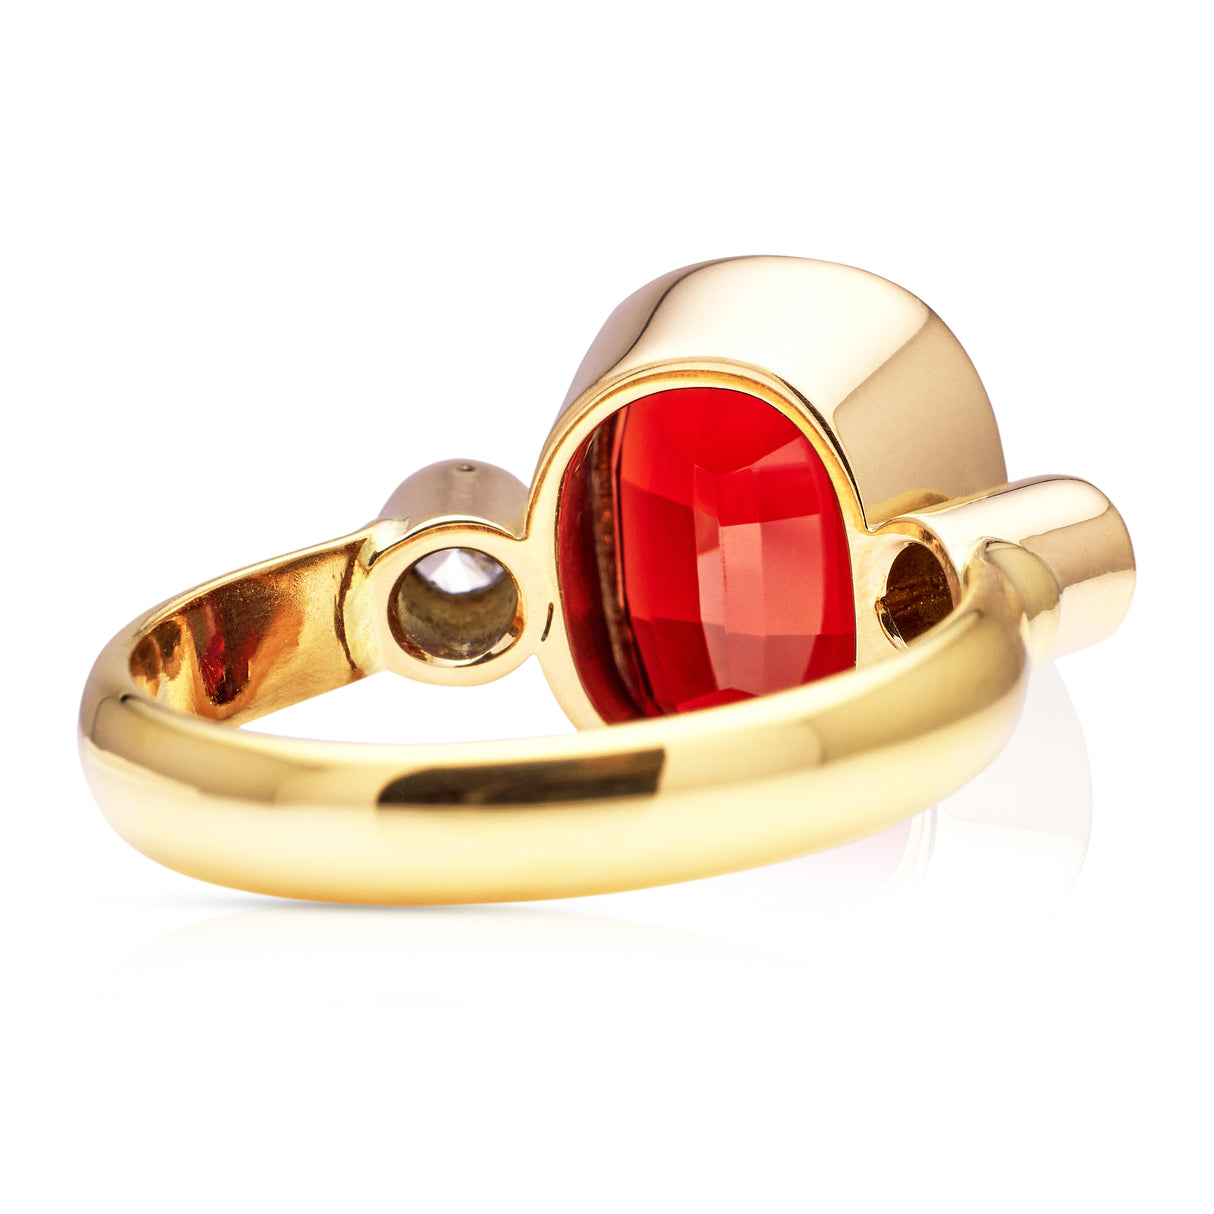 Vintage 8ct Cushion Cut Red Zircon and Diamond Cocktail Ring, 21ct Yellow Gold